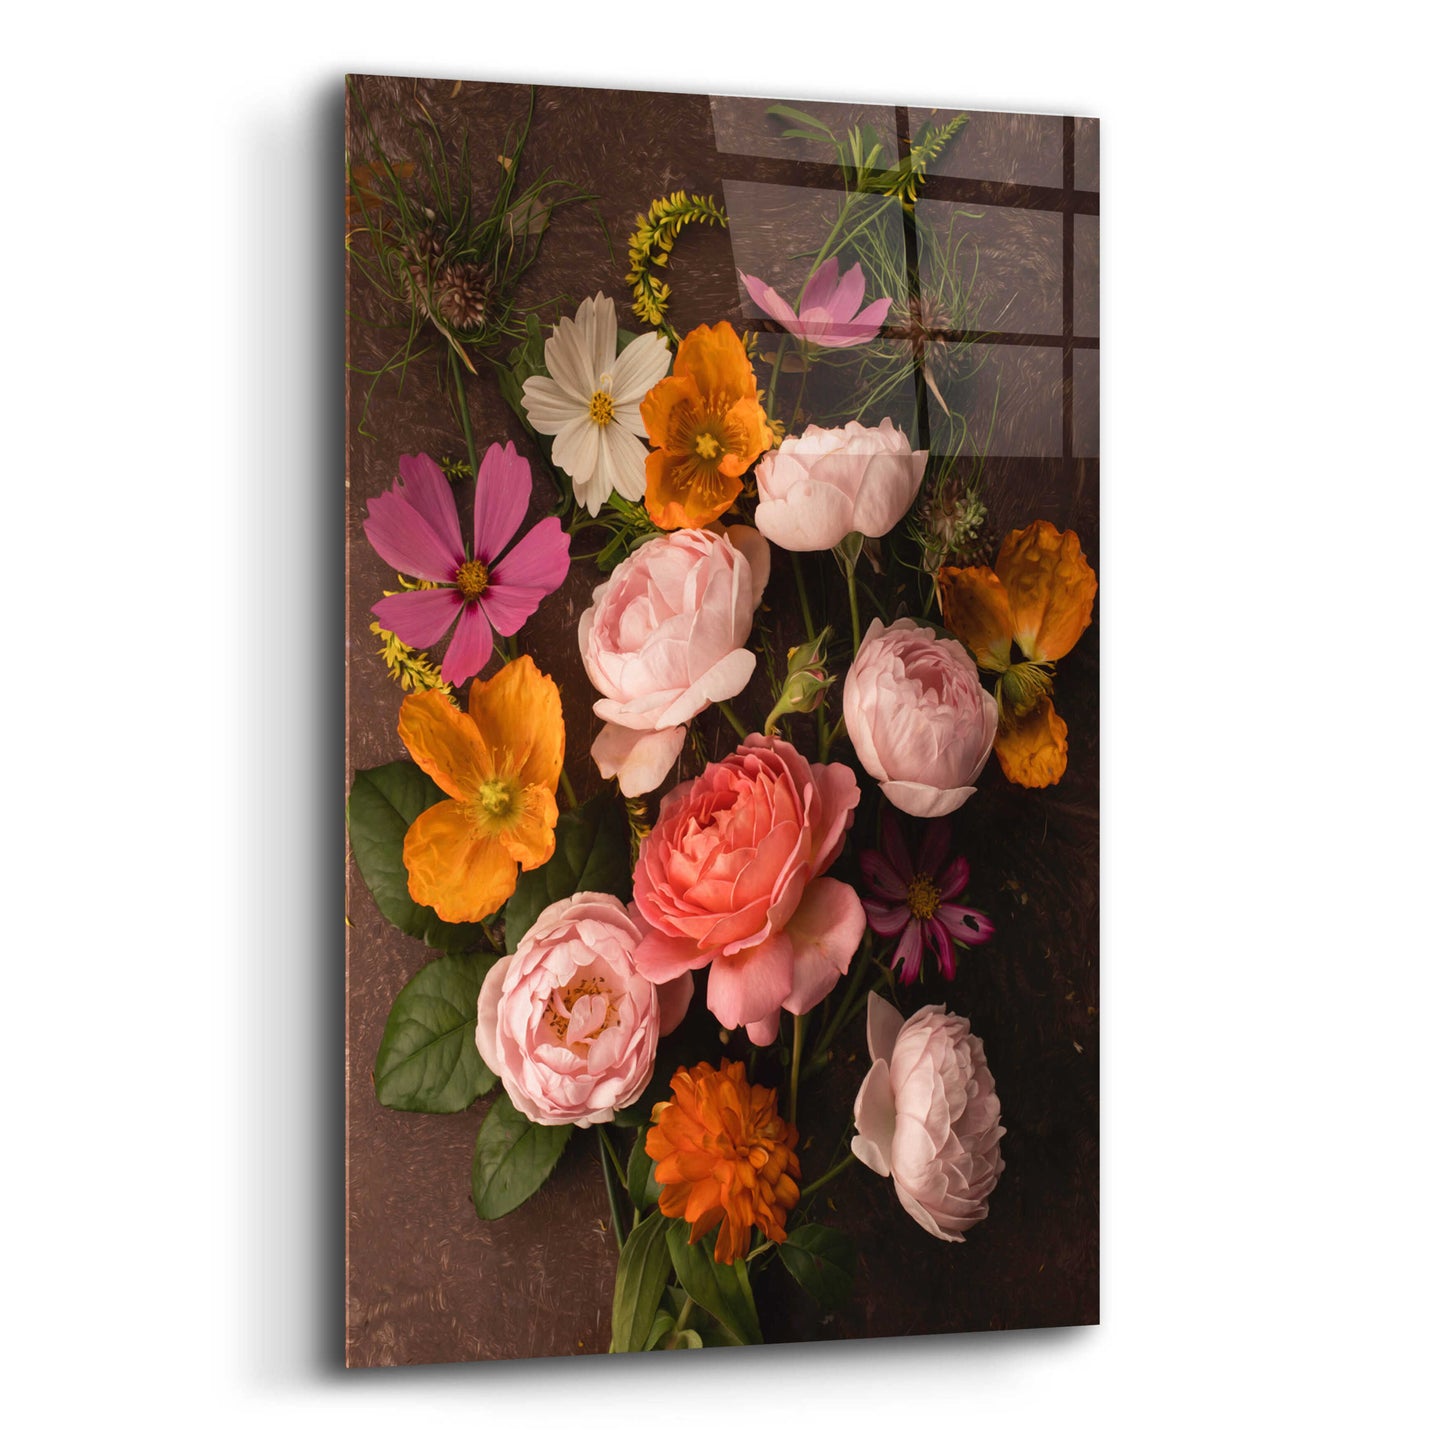 Epic Art 'A Pocket Full of Posies' by Leah McLean, Acrylic Glass Wall Art,12x16